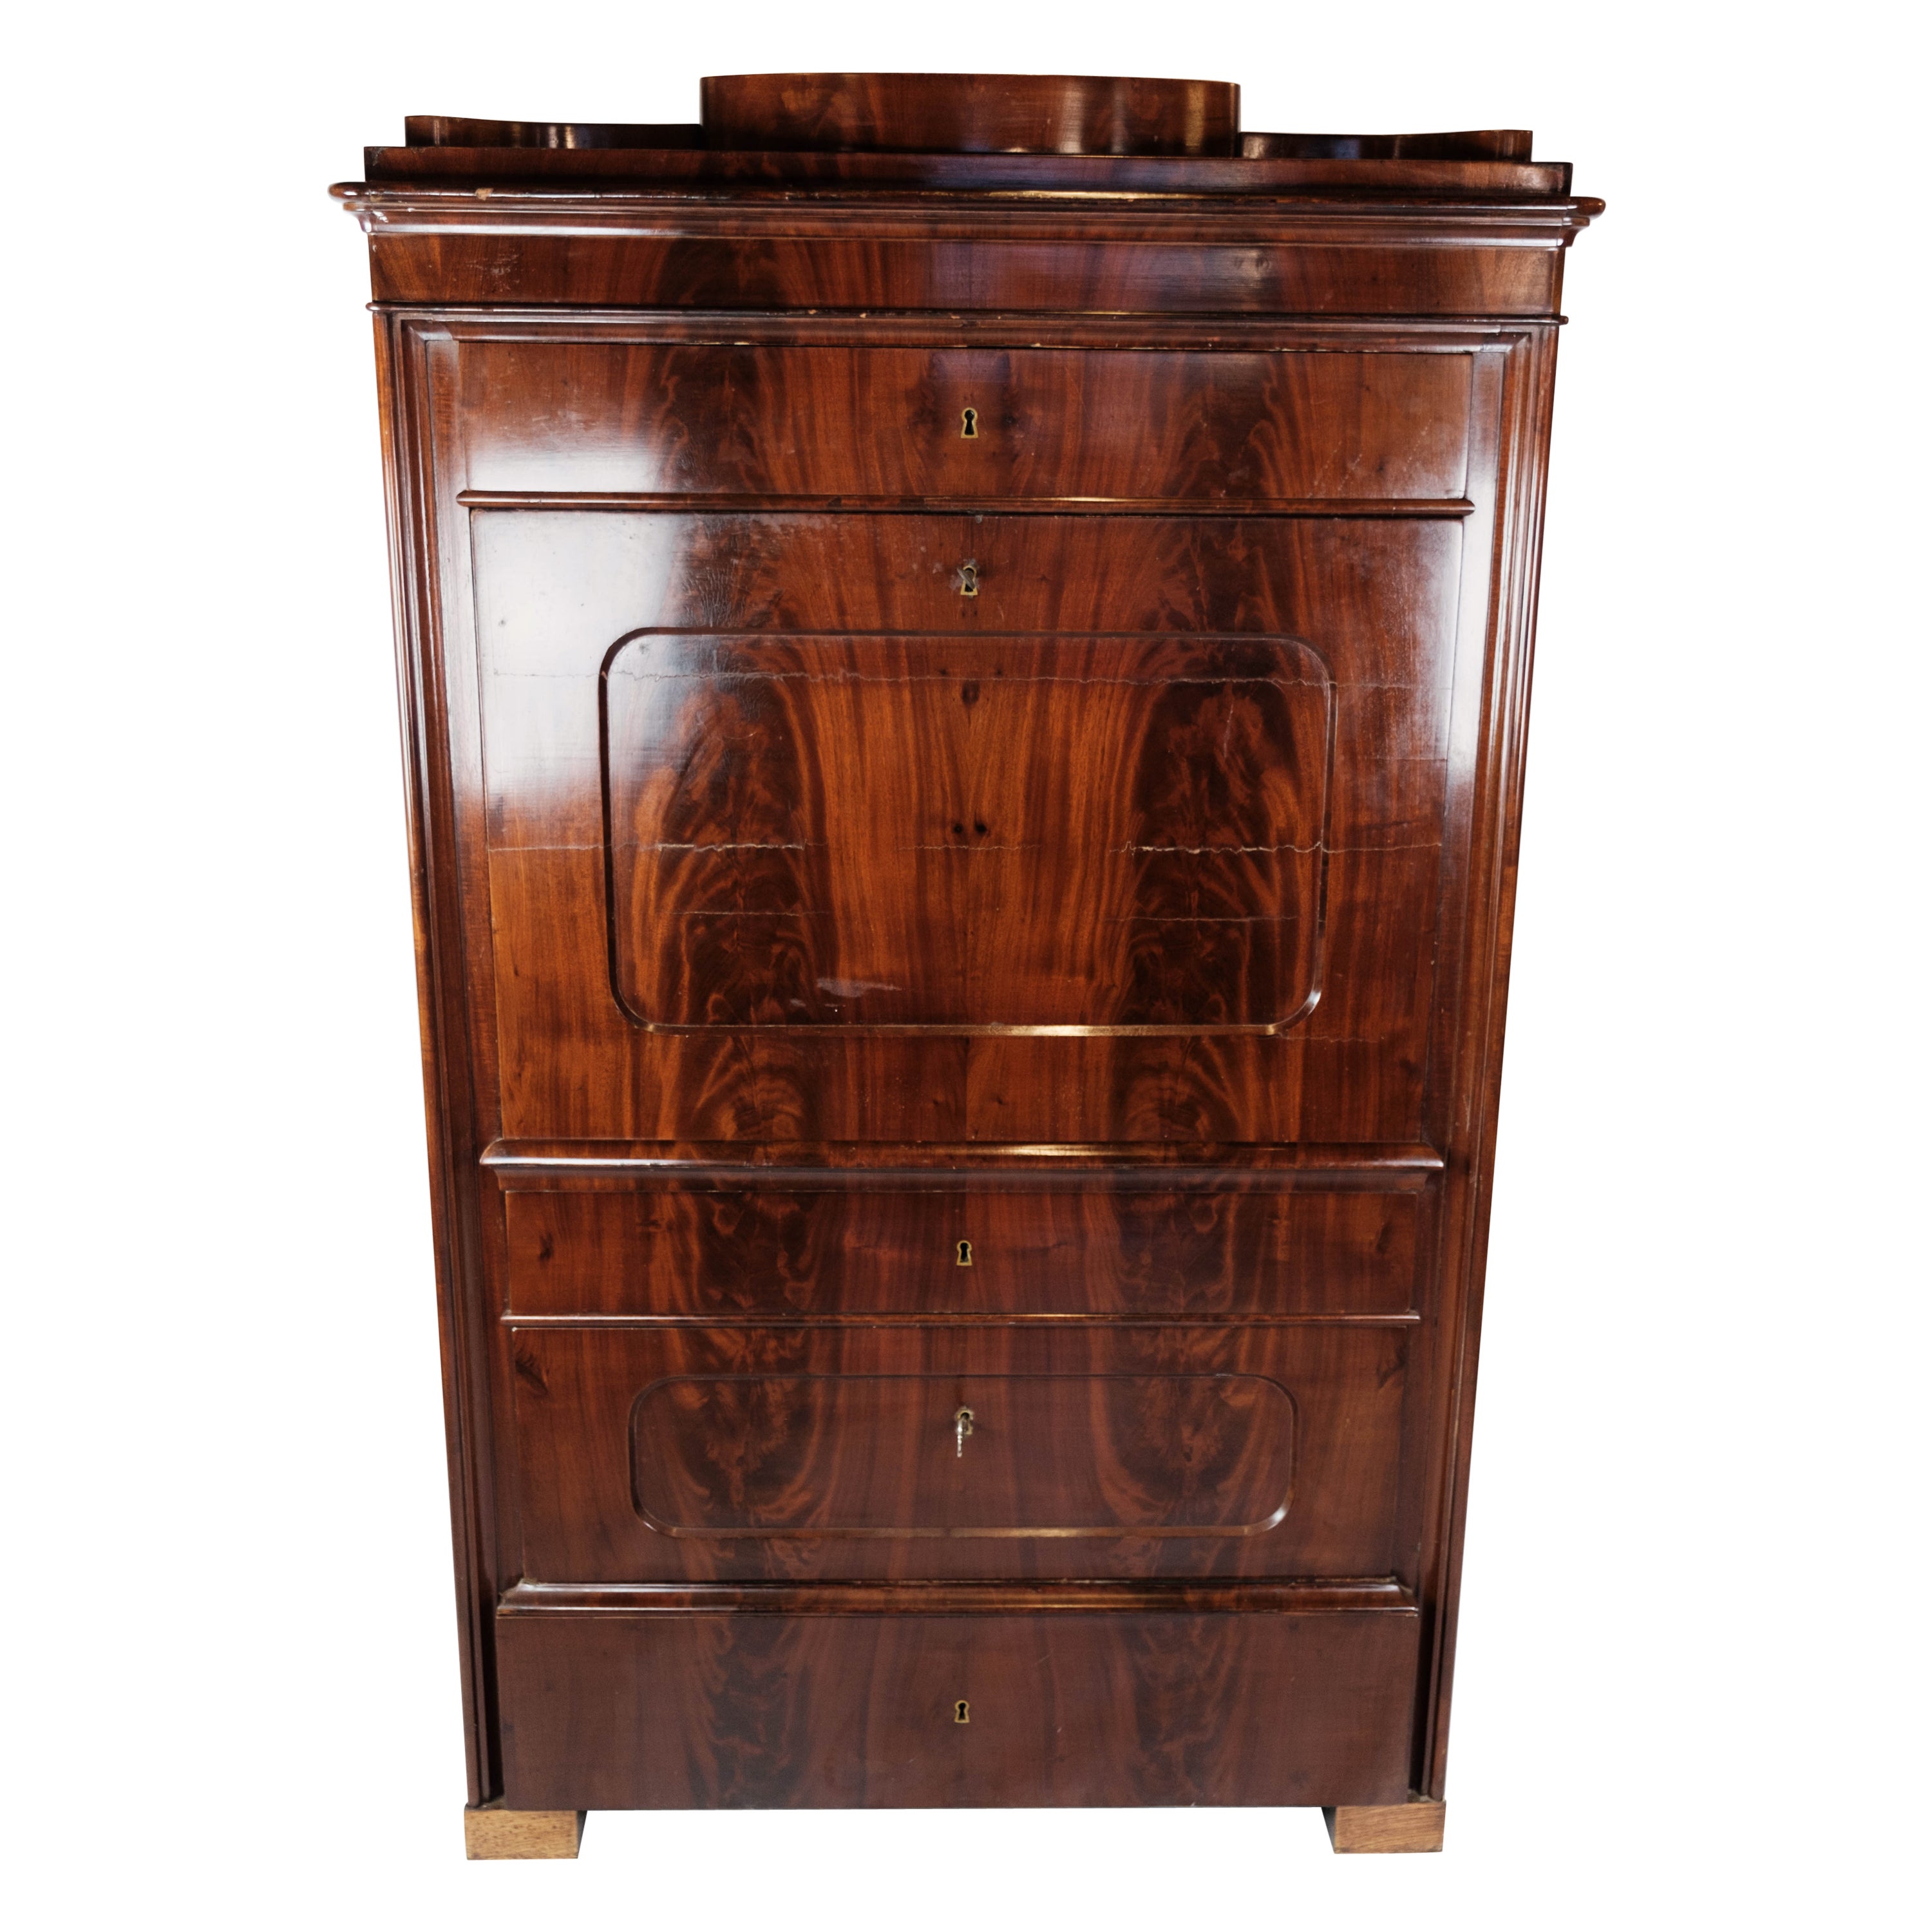 Secretary Made In Mahogany WQith Inlaid Wood From 1840s For Sale